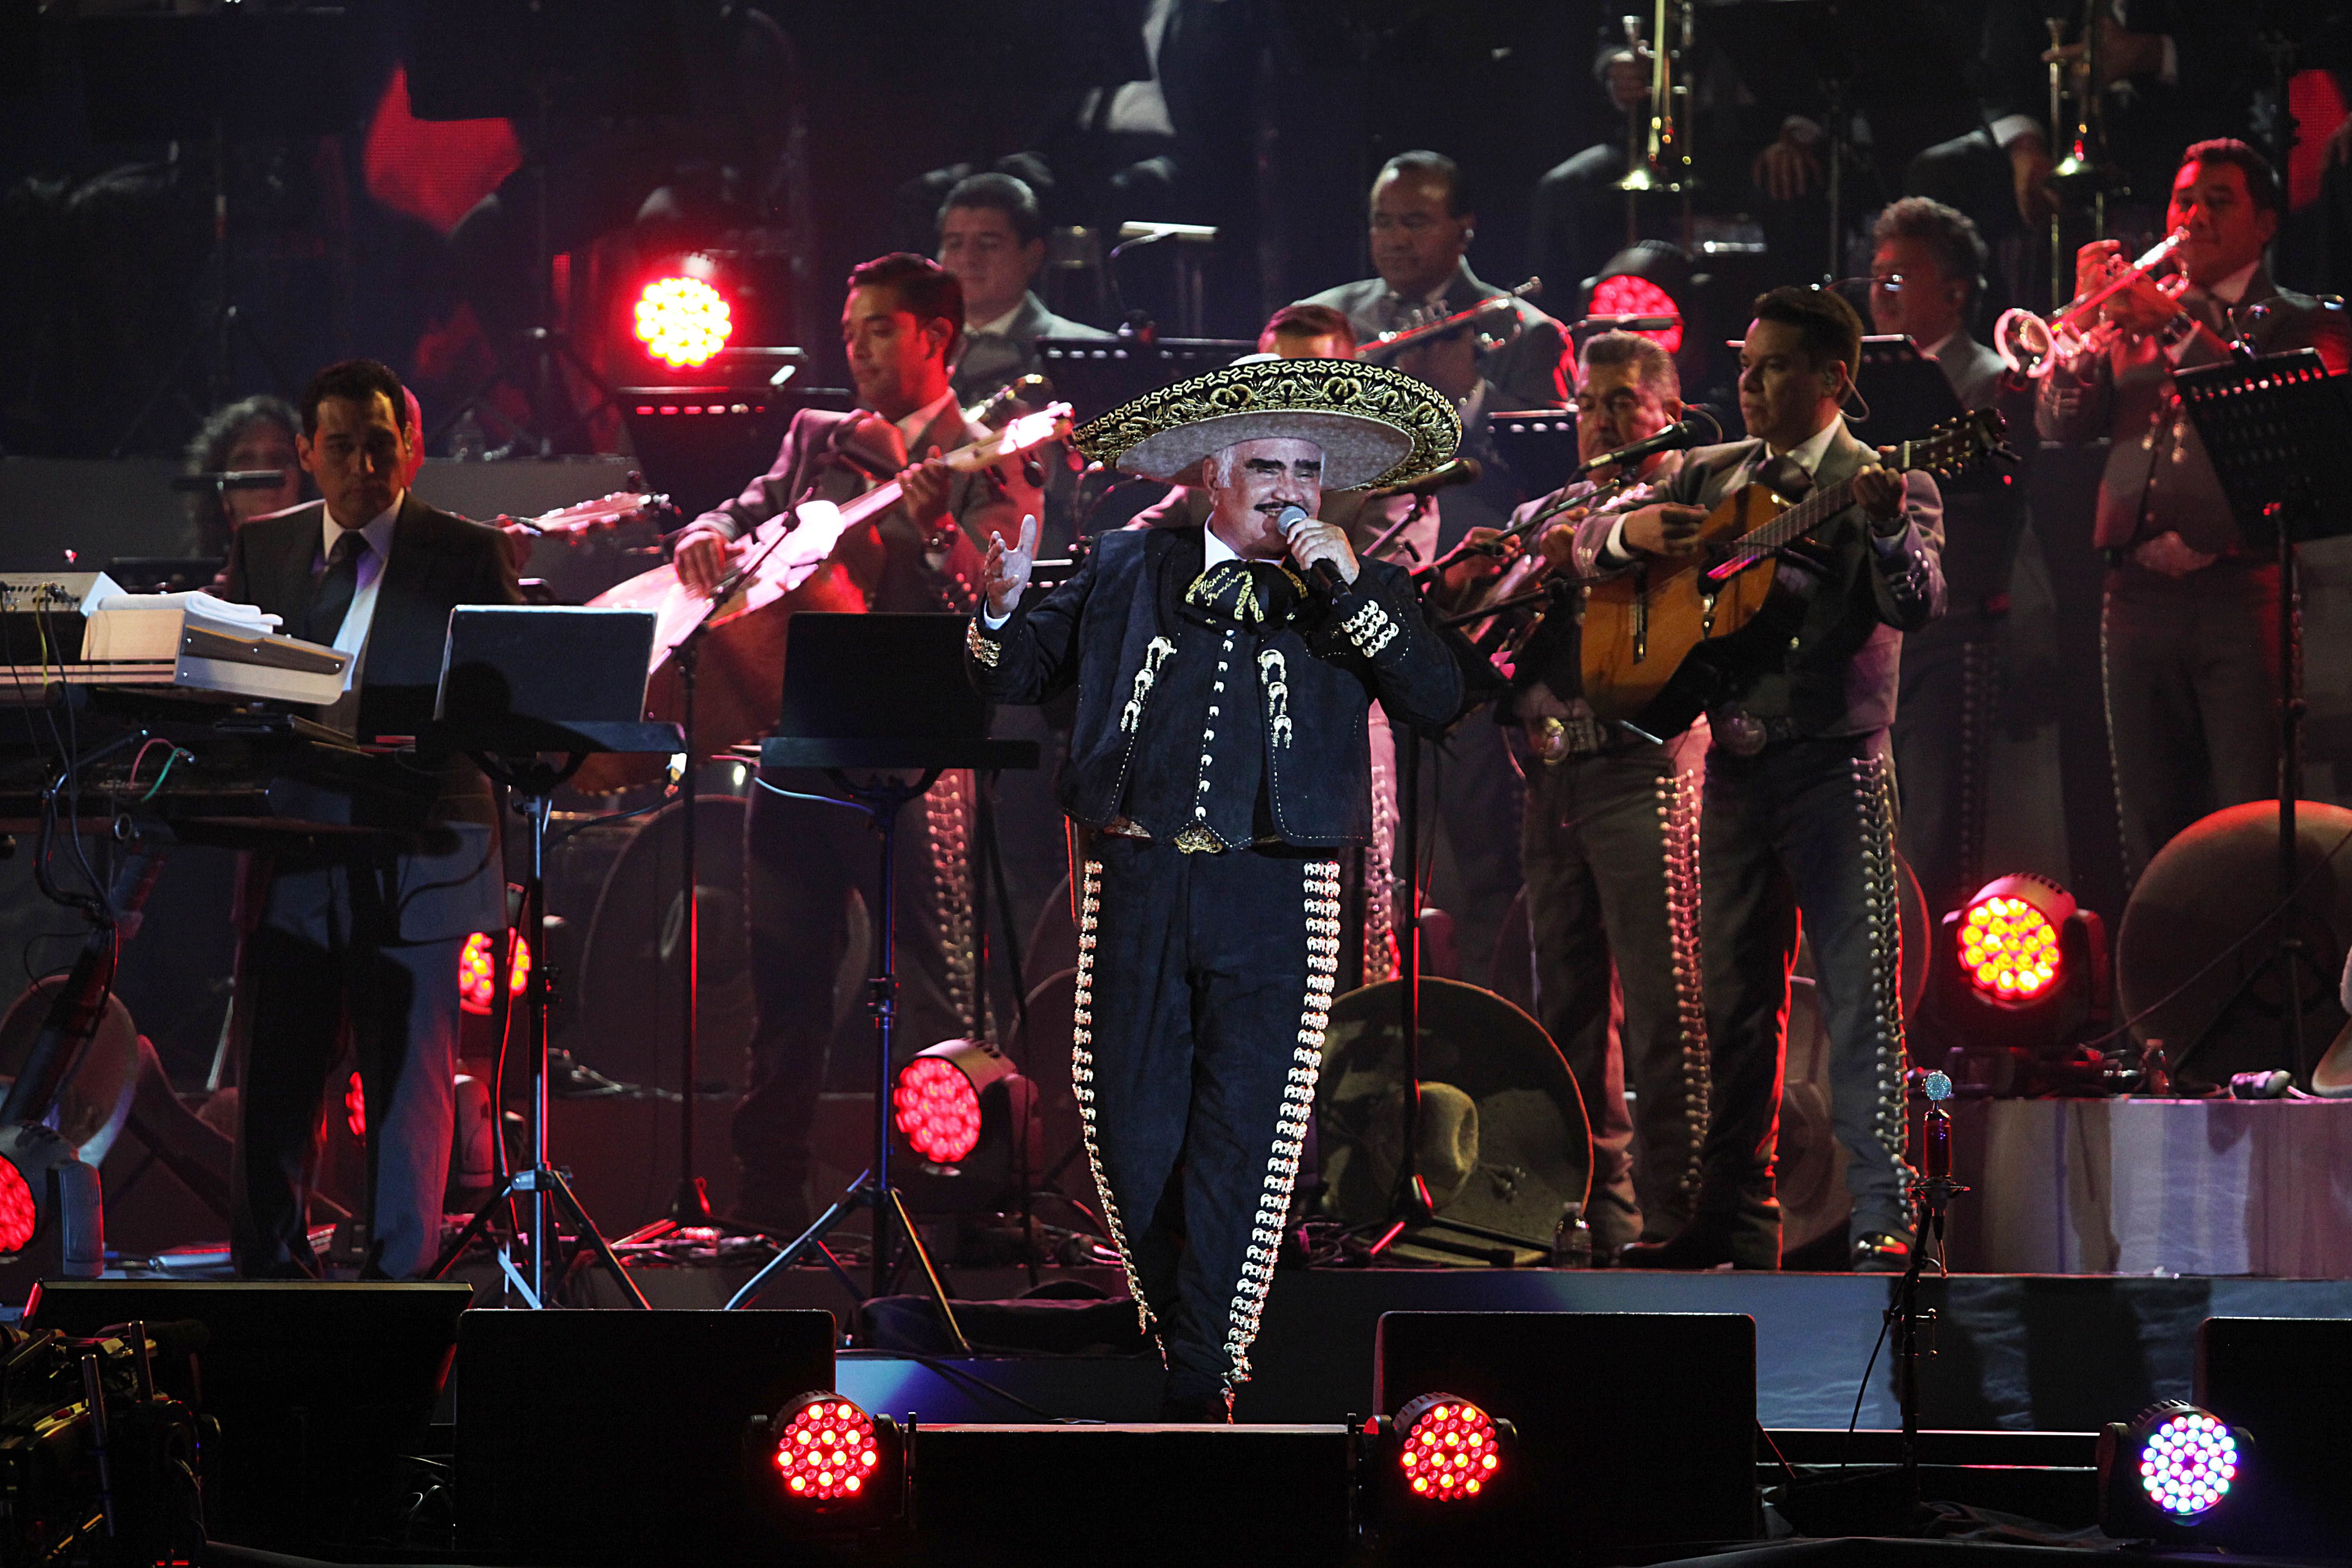 Jaime Jarrín mourned the death of Vicente Fernández and extended